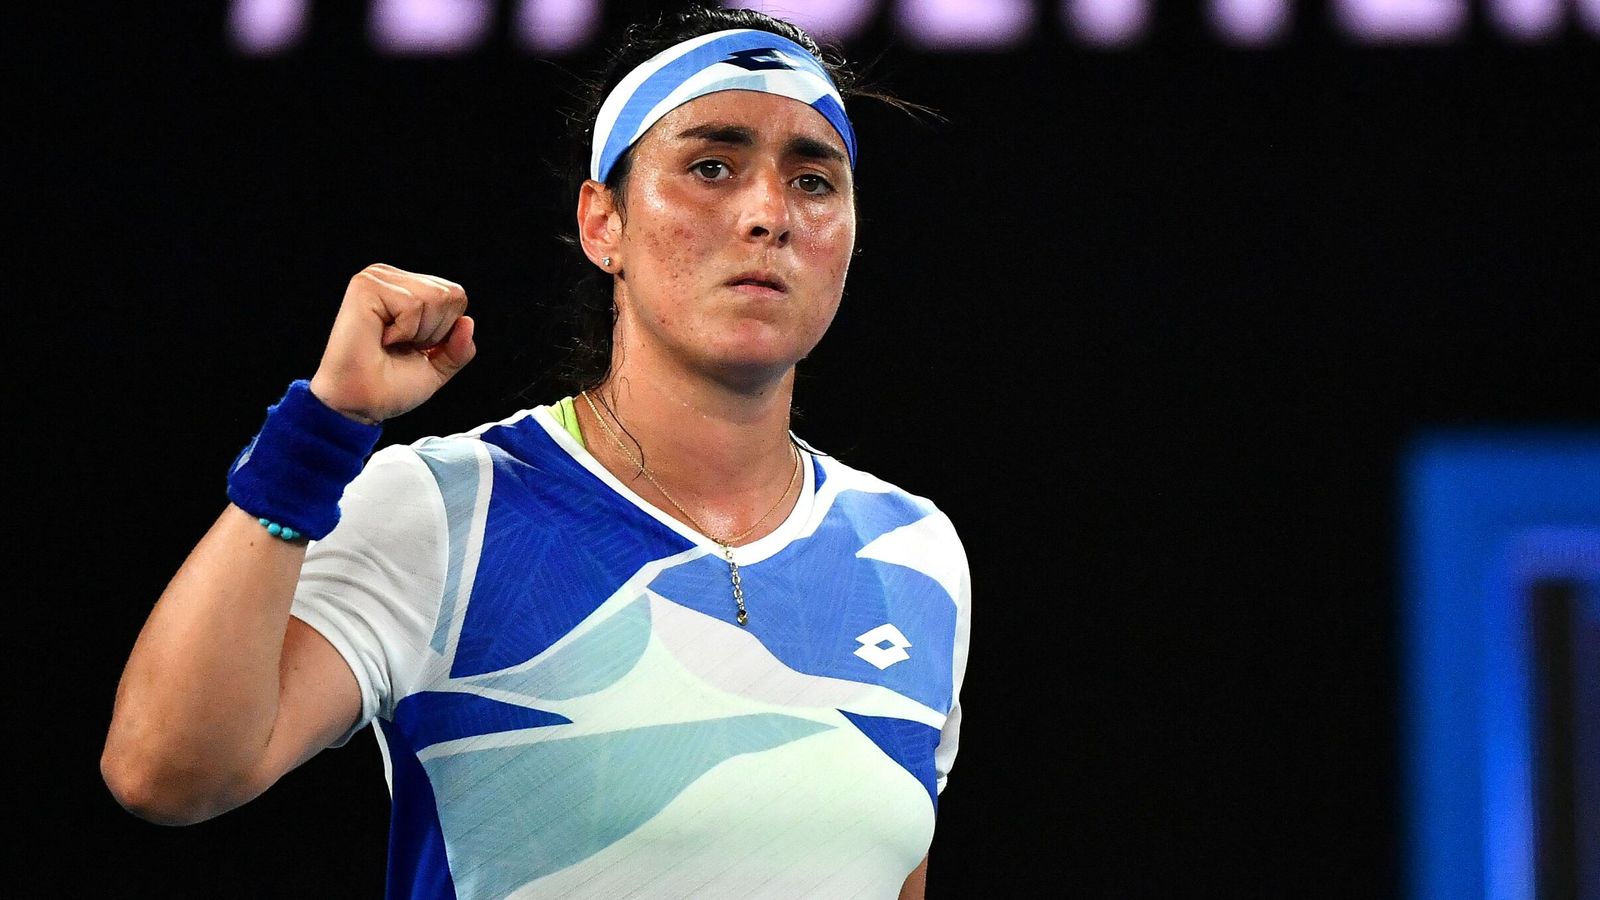 Australian Open: Ons Jabeur rallies to victory in Melbourne as Caroline Garcia and Aryna Sabalenka also advance | Tennis News | Sky Sports